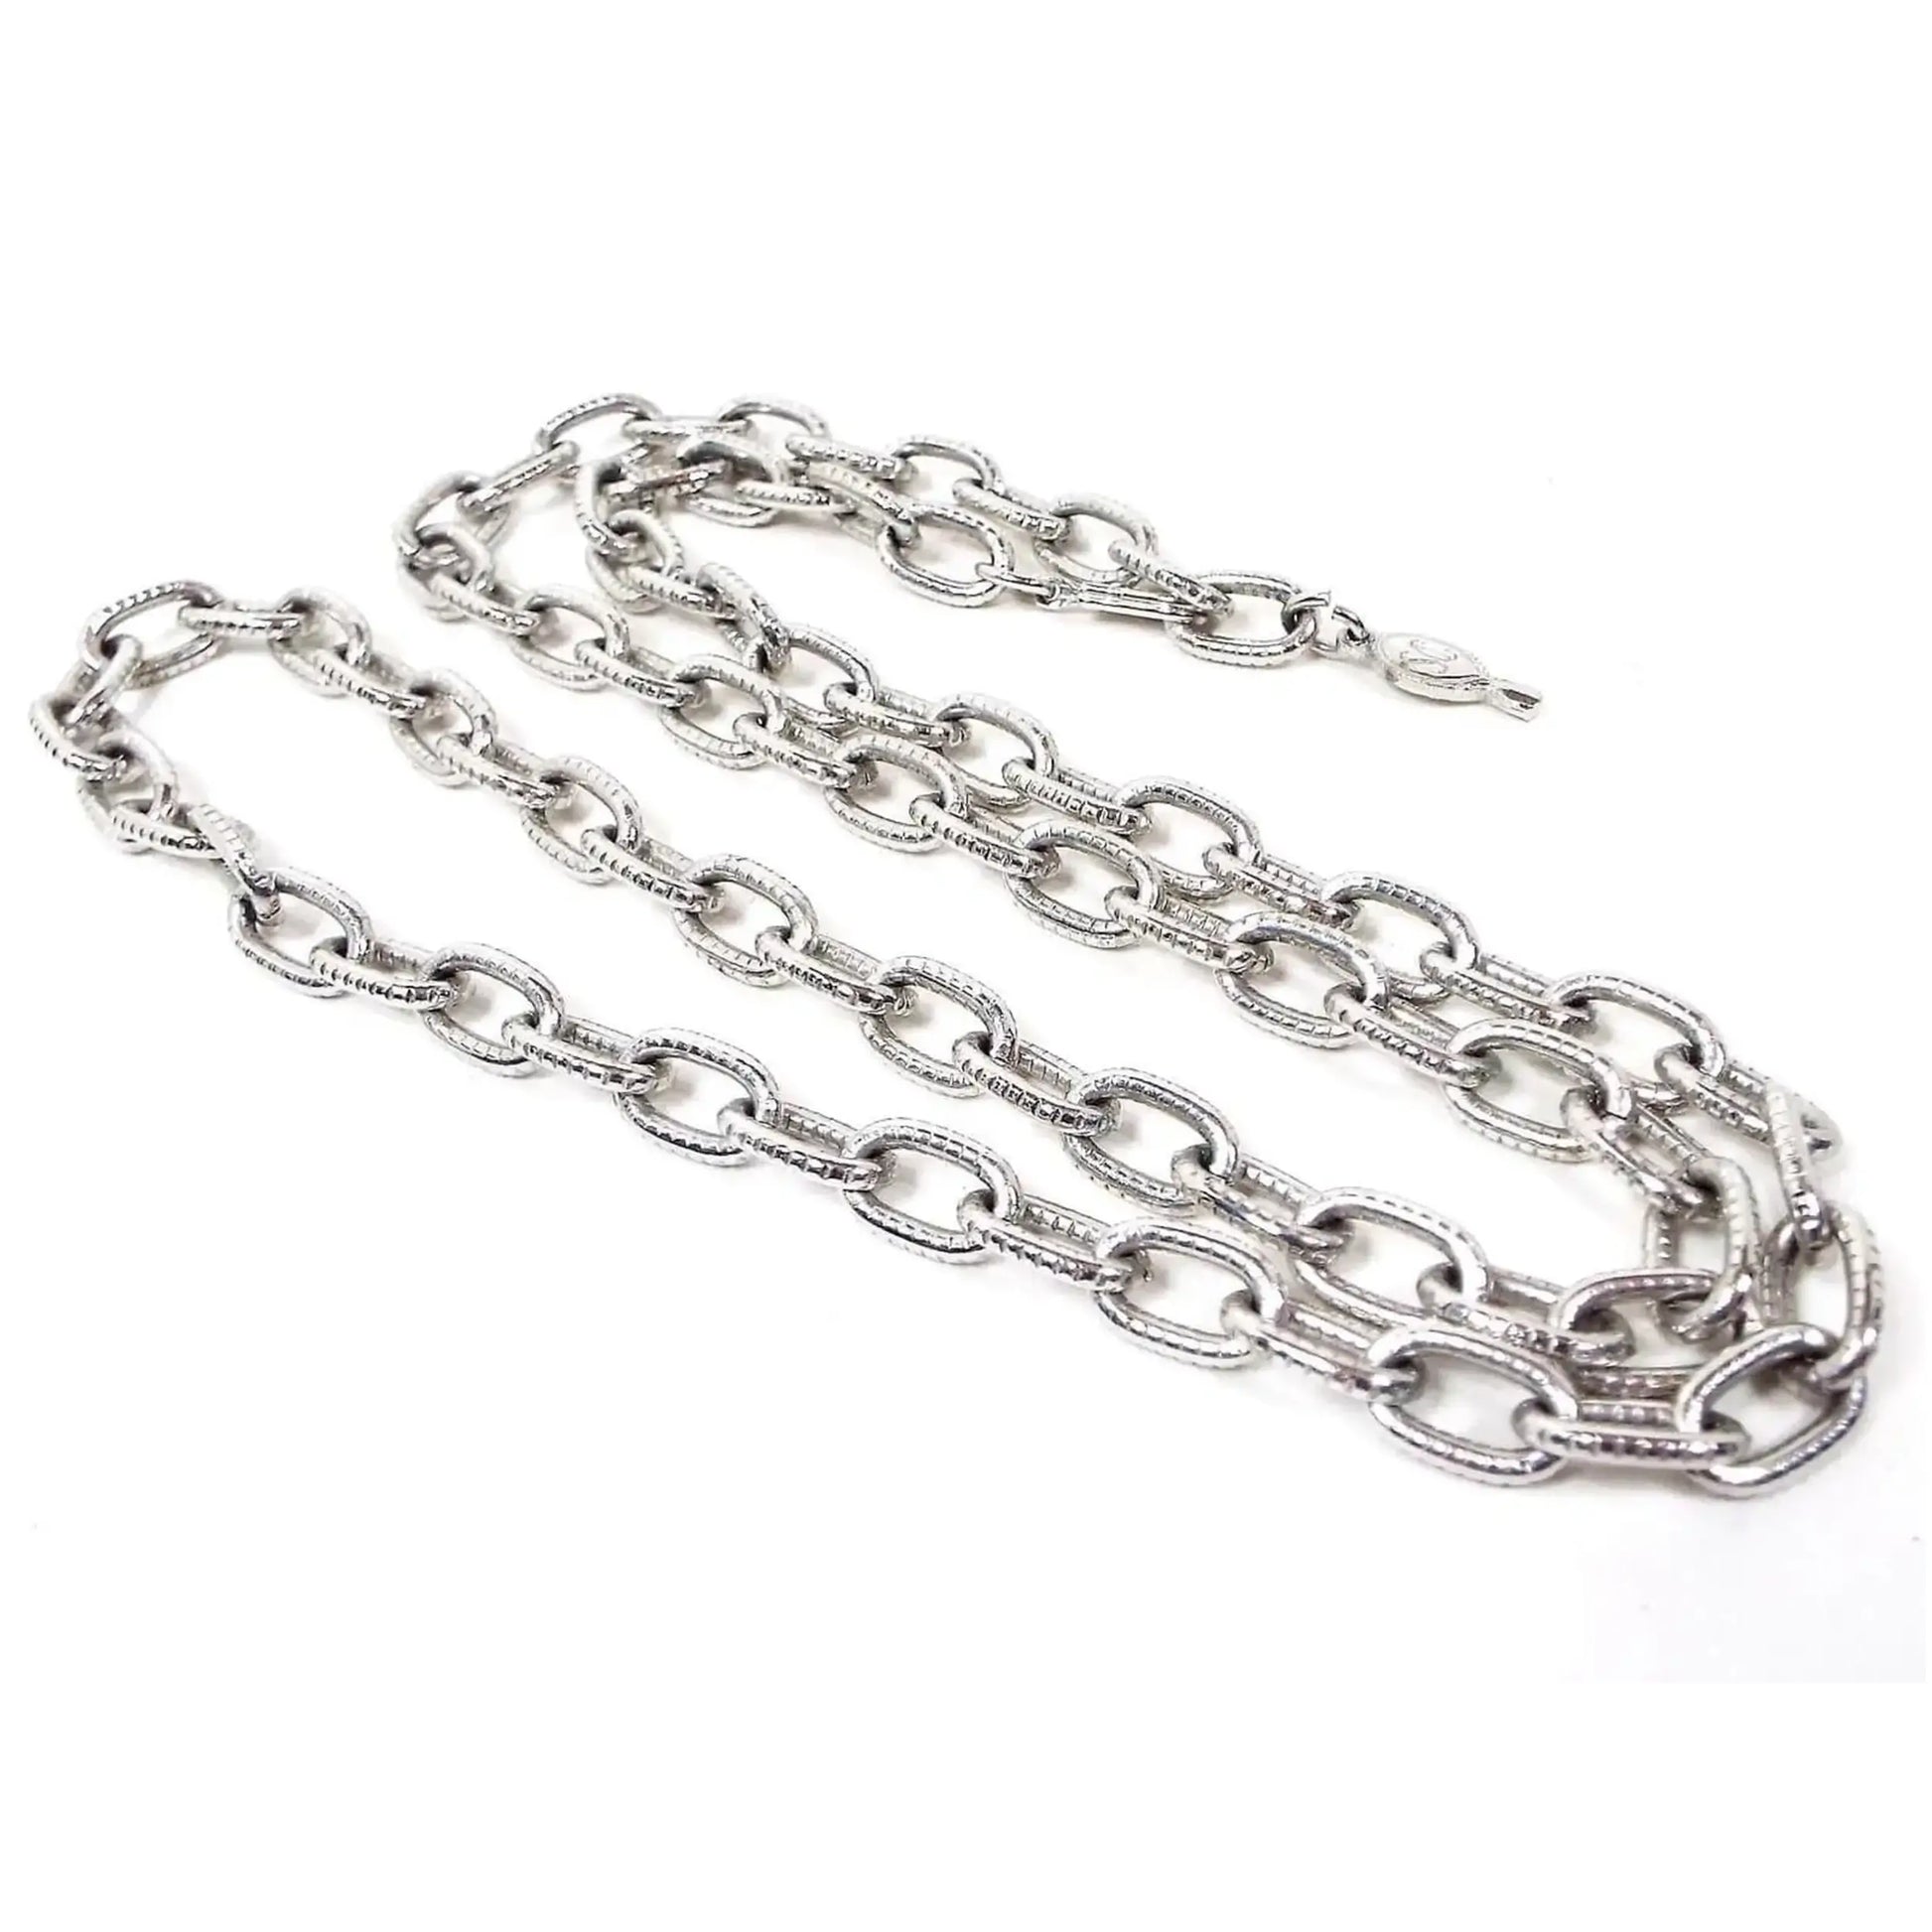 Front view of the Mid Century vintage Sarah Coventry chain necklace. It is silver tone in color. The cable chain has larger sized oval links with a lightly textured tiny line design on them. There is a hook style clasp at one end and an open ring at the other so you can adjust the length when wearing. There is a hang tag at one end with SC stamped on it.